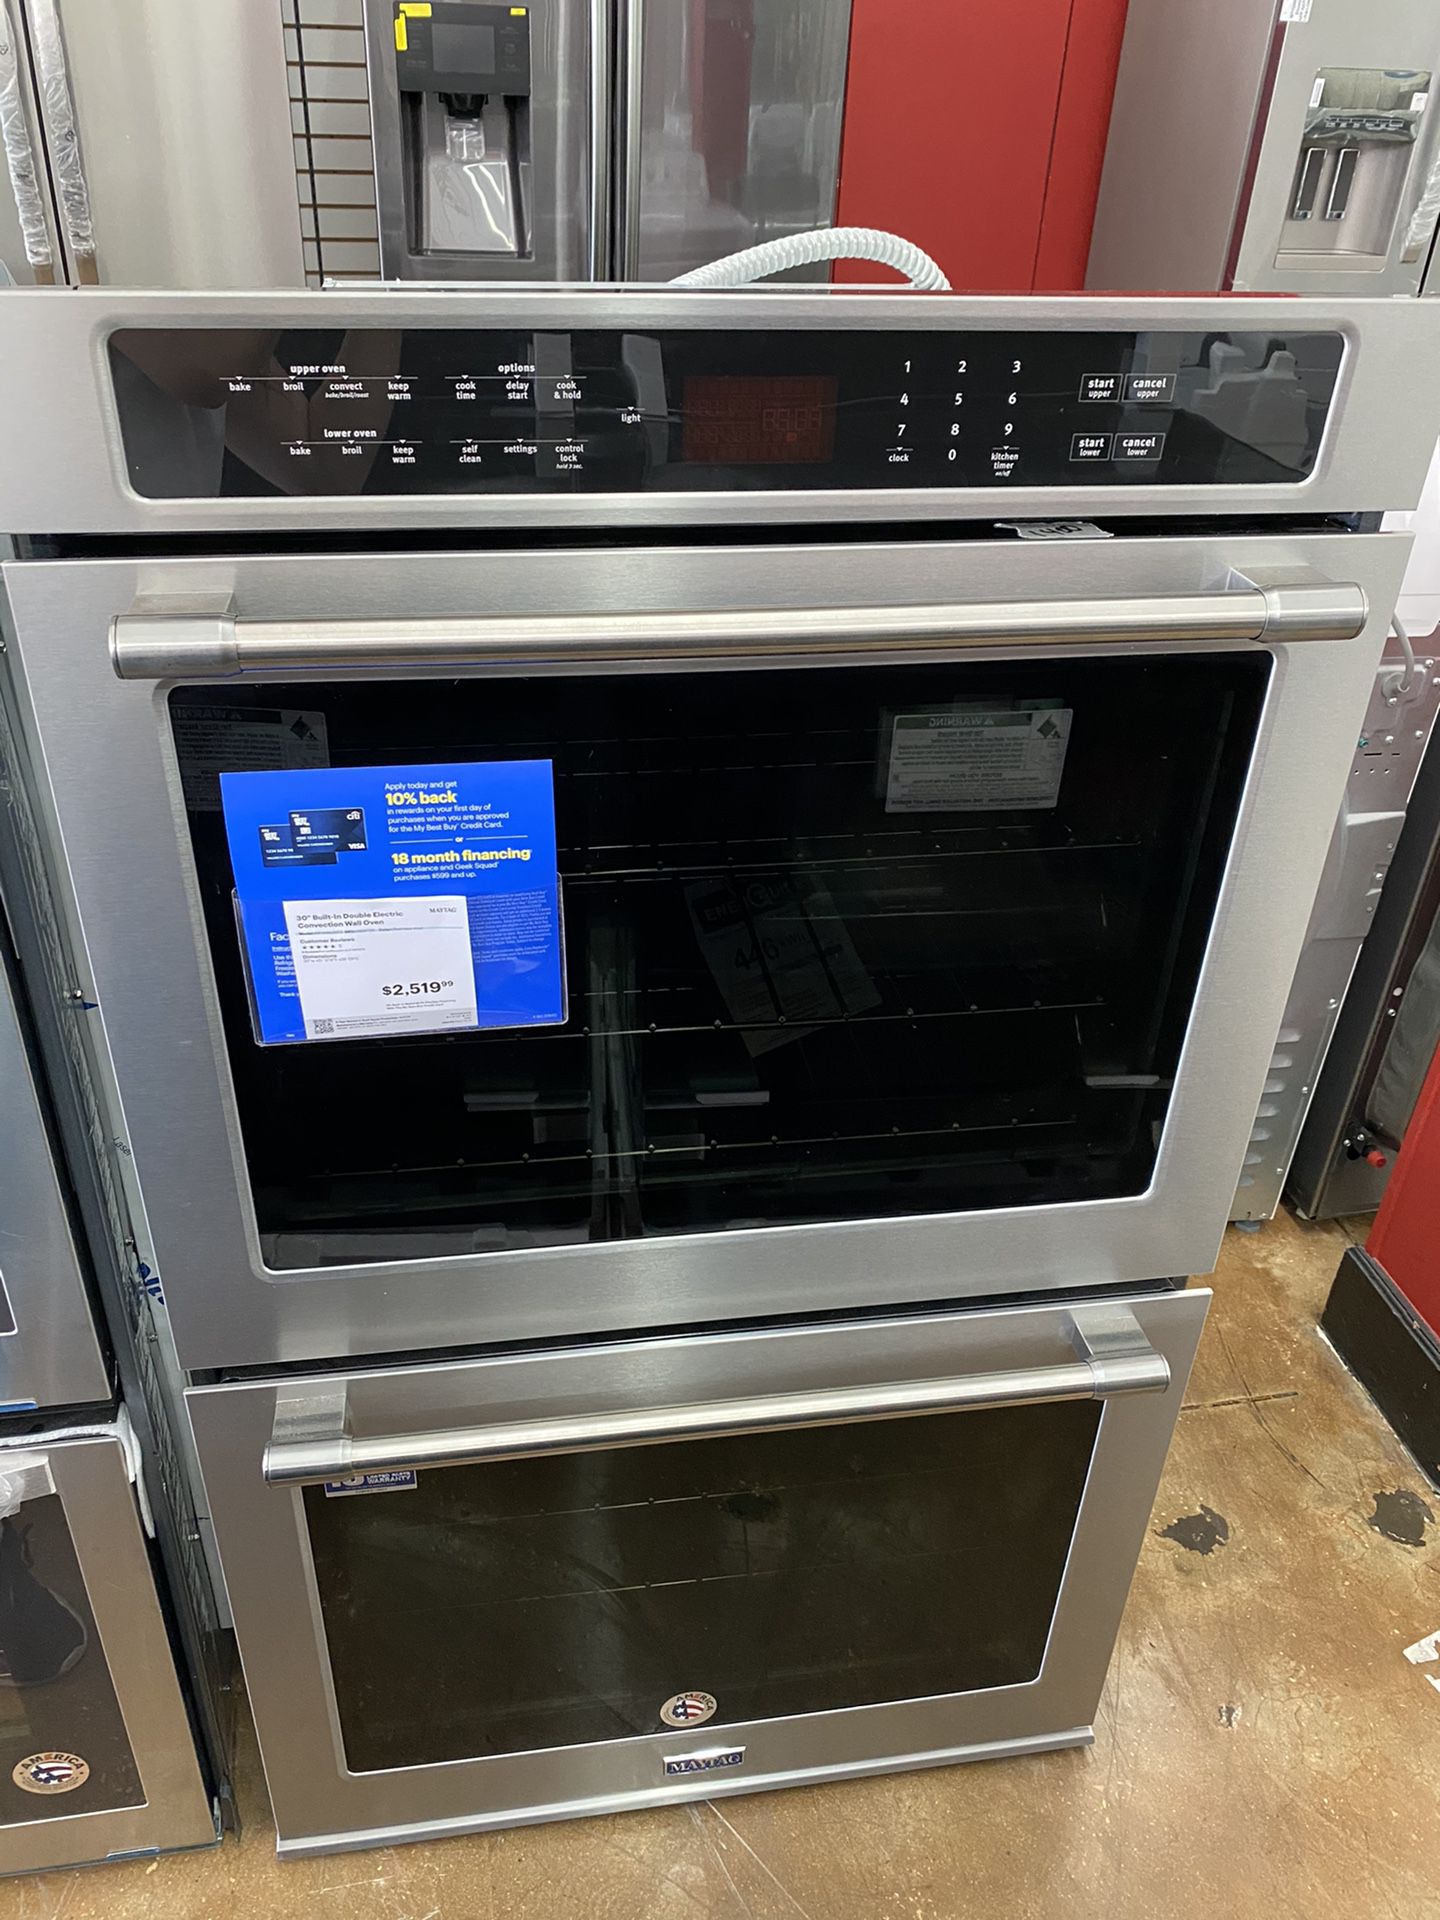 Double oven, Viking, kek appliances, kissimmee, $39 down payment, ask for enas